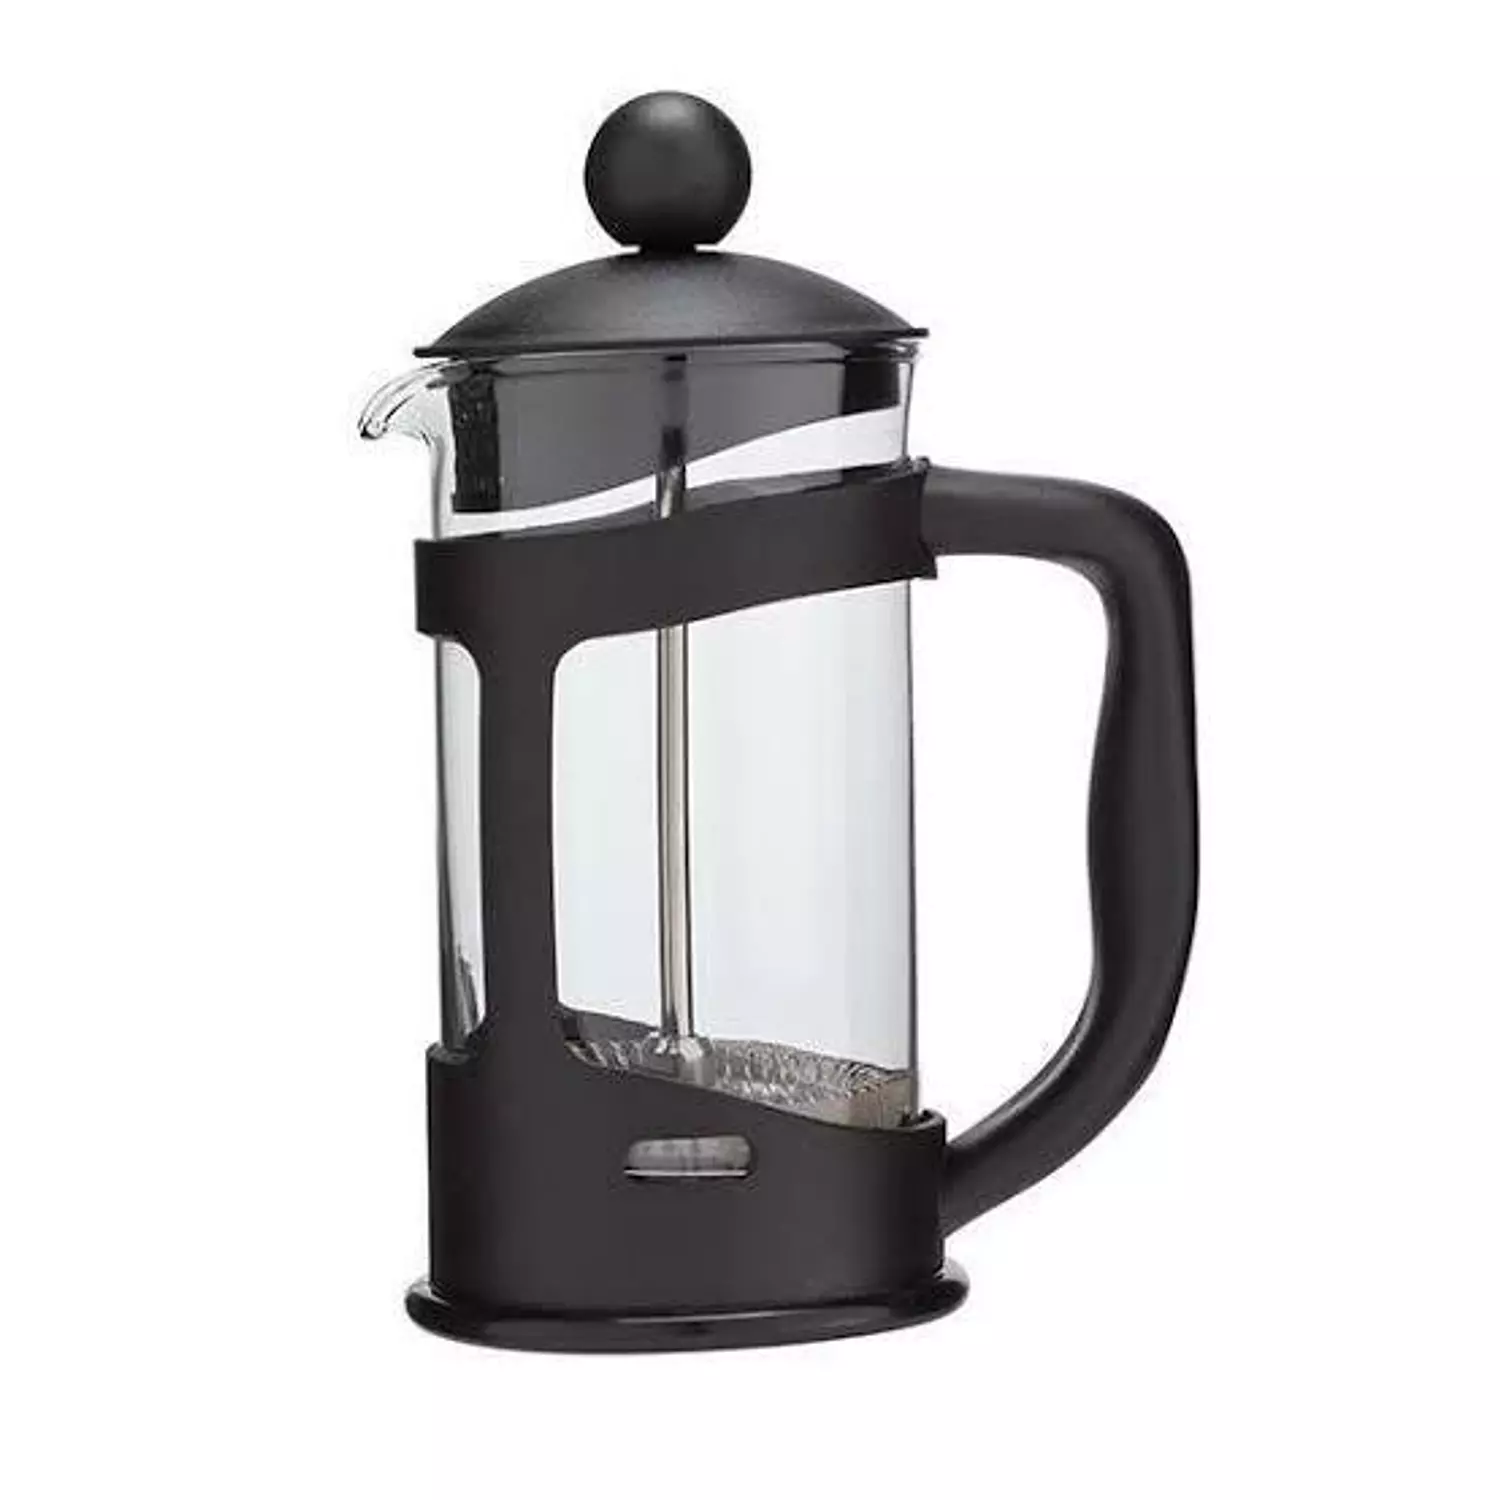 High quality 350ml French press filter coffee making tool hover image